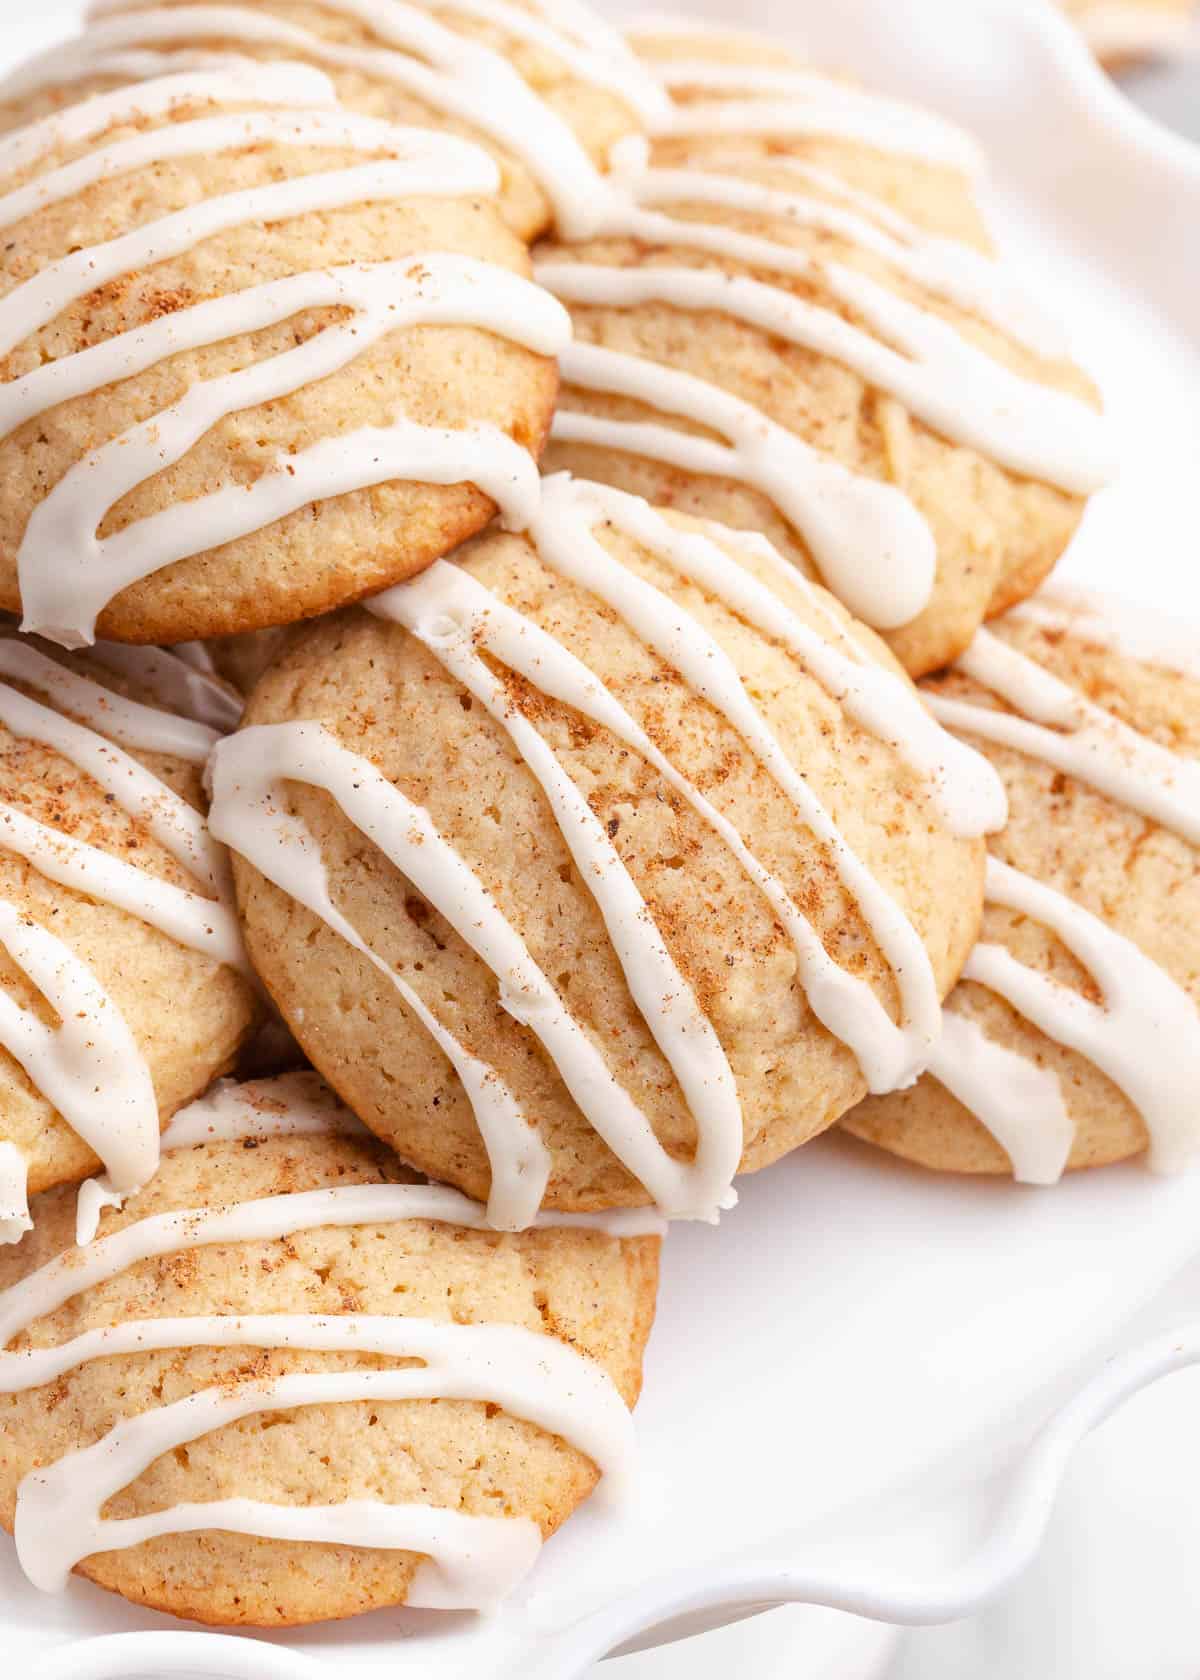 Eggnog cookies on white plate.